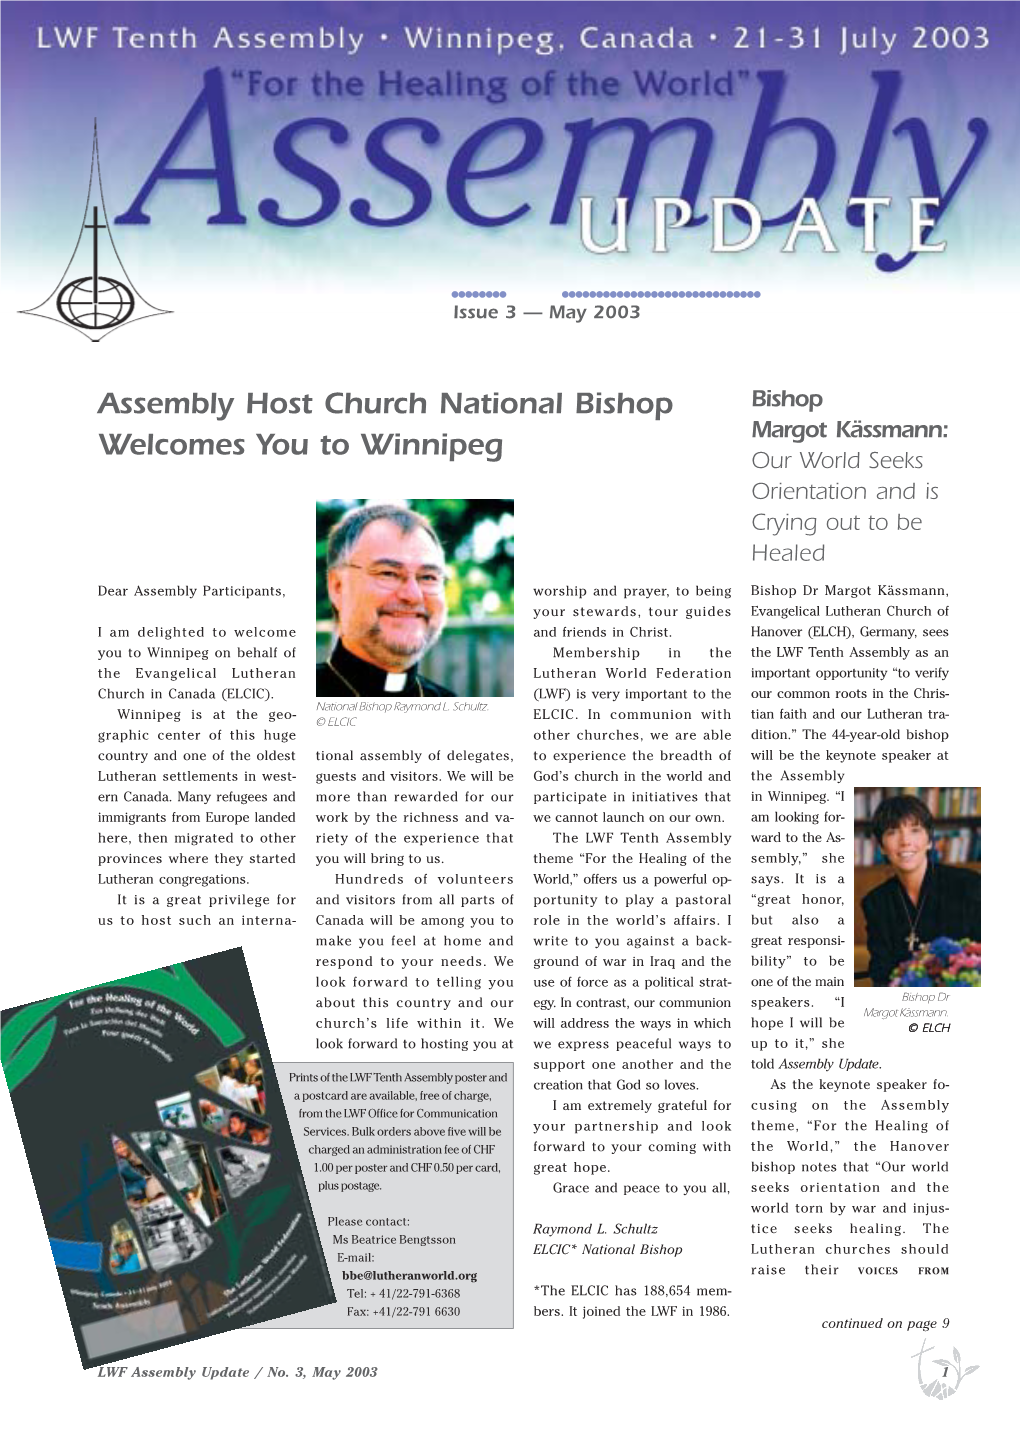 Assembly Host Church National Bishop Welcomes You to Winnipeg